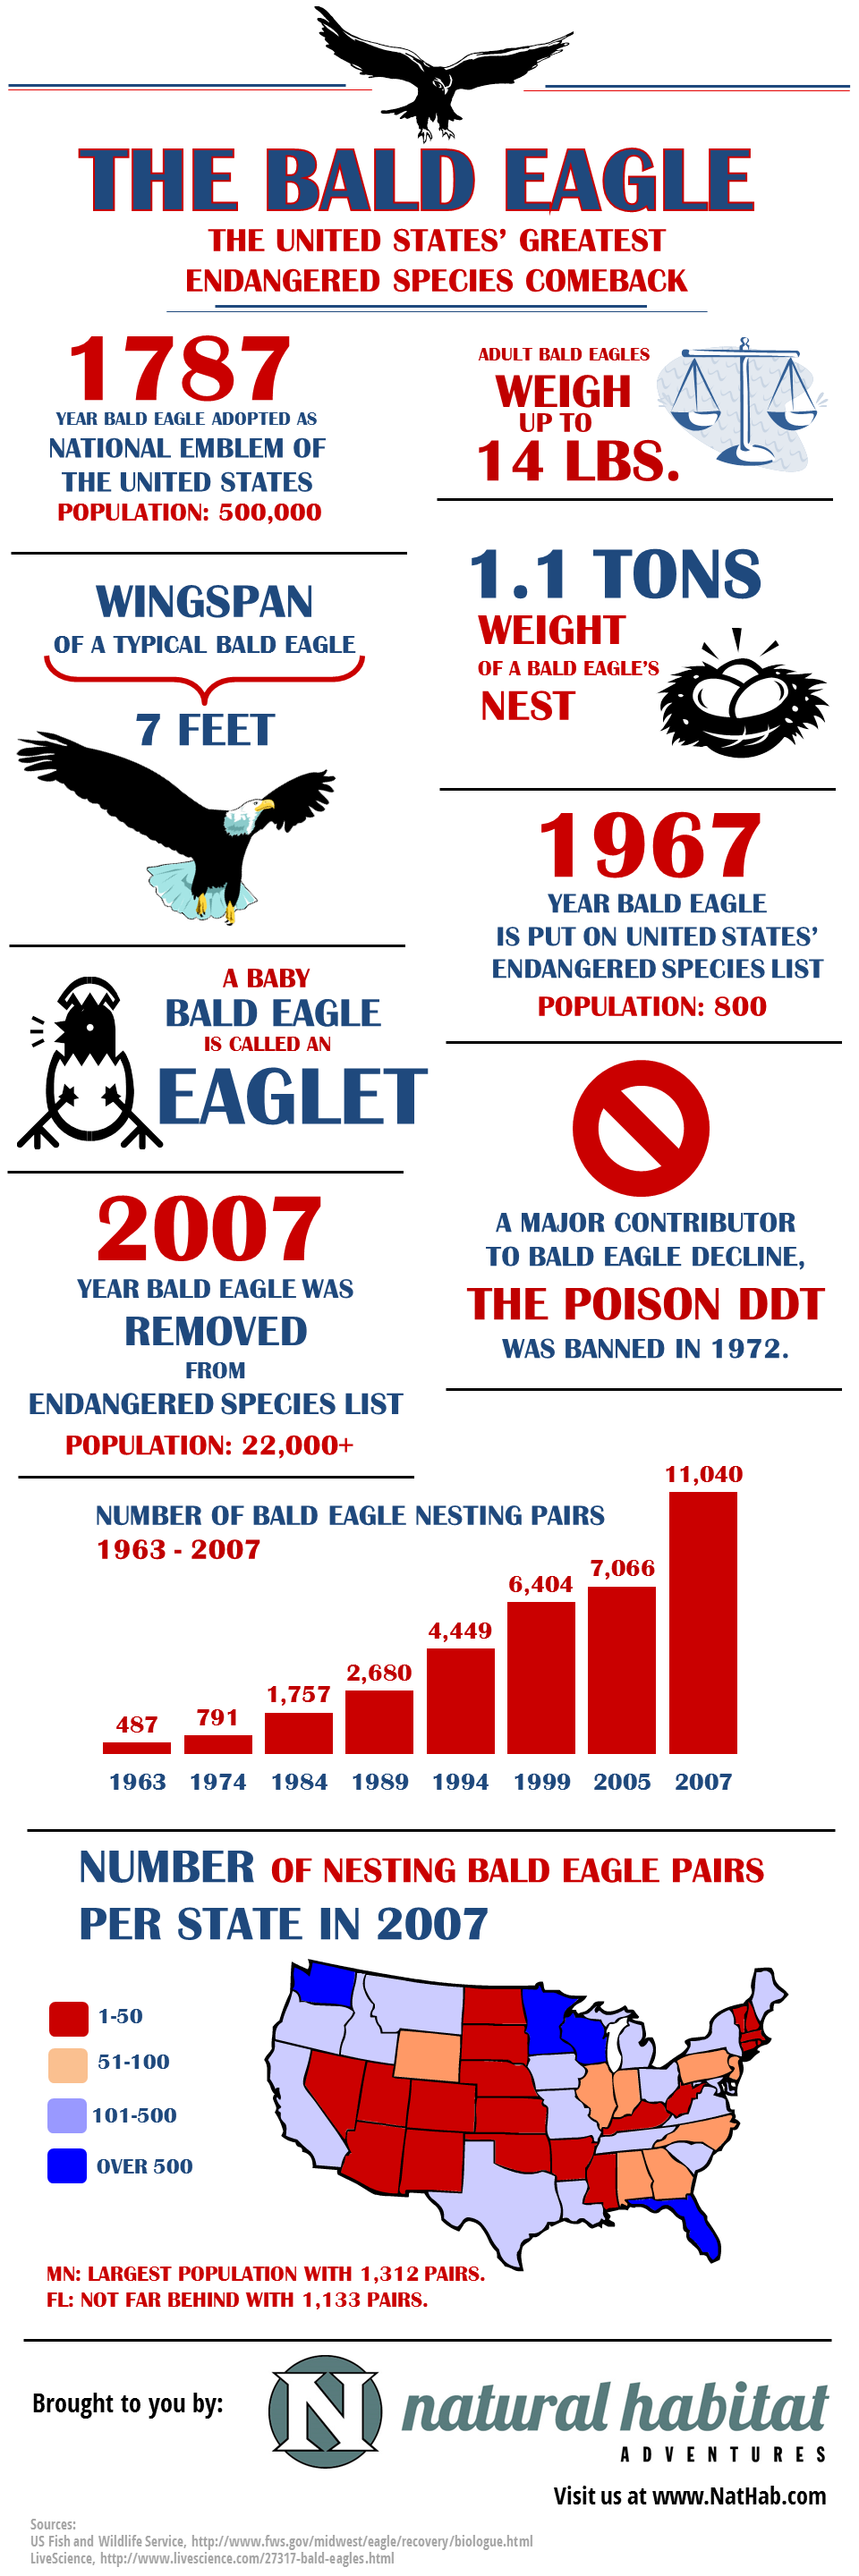 Bald Eagle Facts for 4th of July [Infographic]